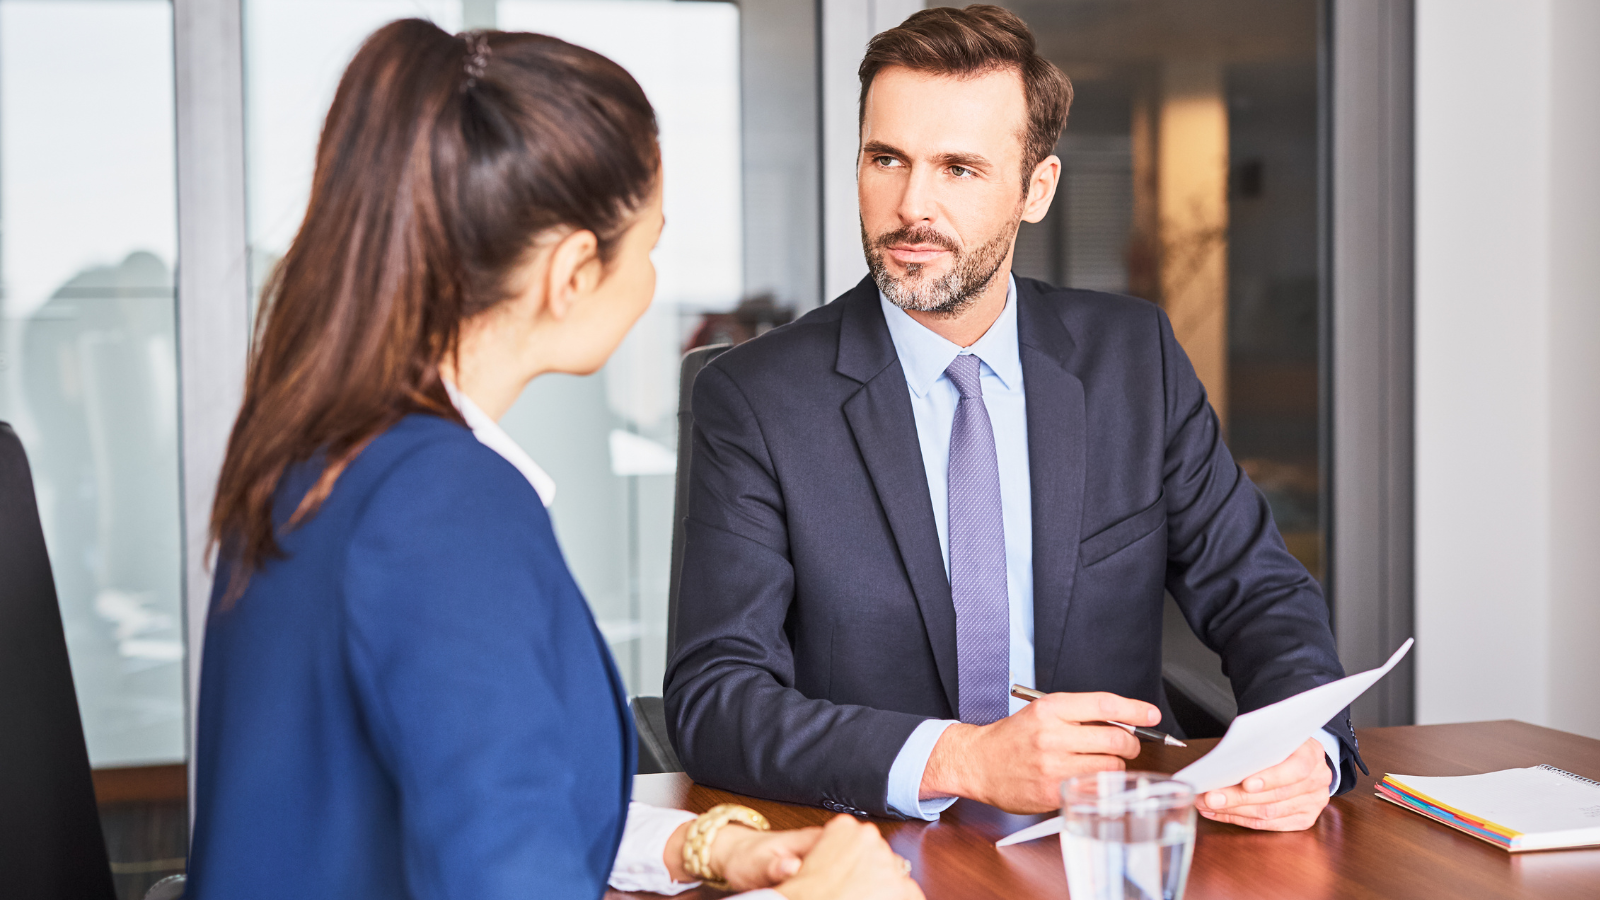 10 Best Practices For Conducting a Great Candidate Interview